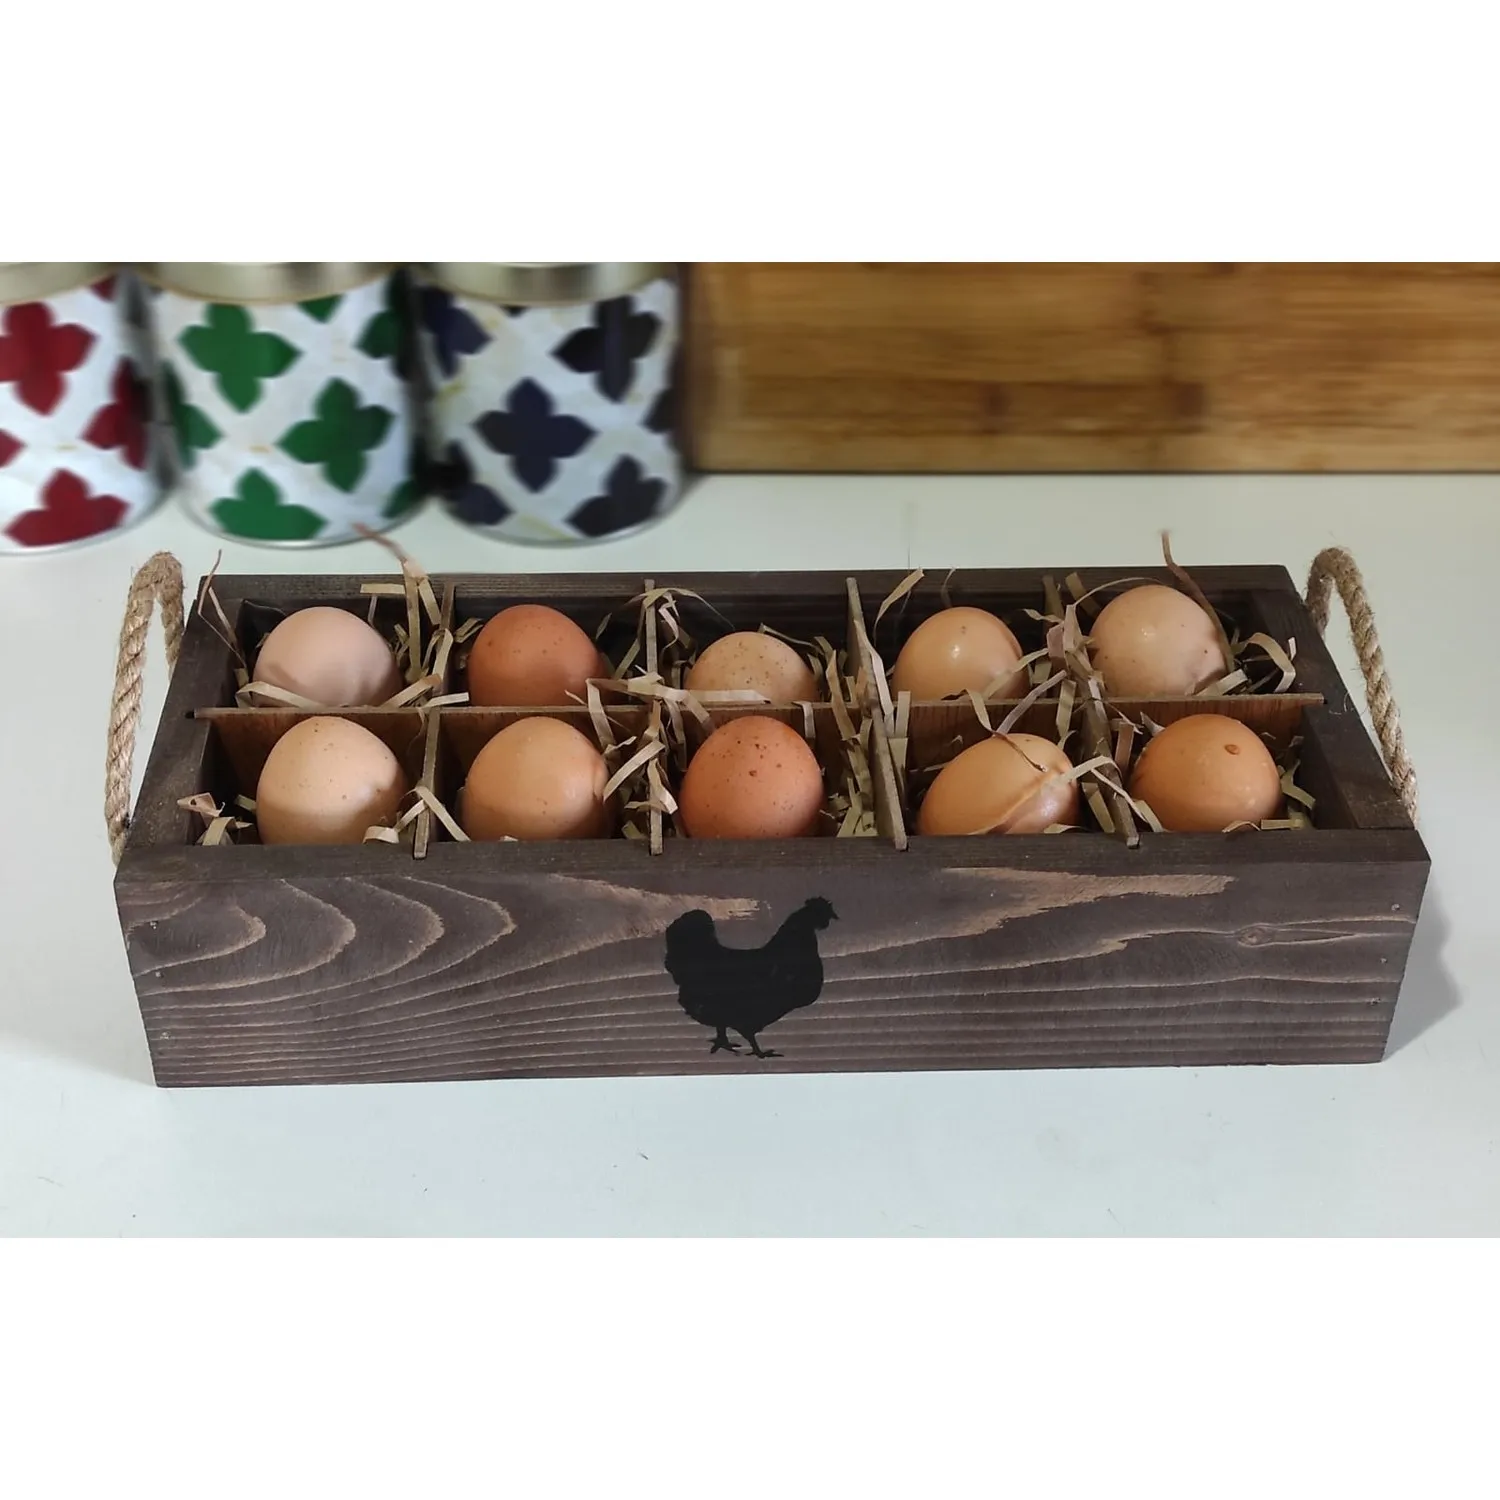 

Wooden Egg Storage Rack 1 Tiers Refrigerator Egg Organizer Container 10 Grid Space Saving Kitchen Egg Holder Natural Farm's Life